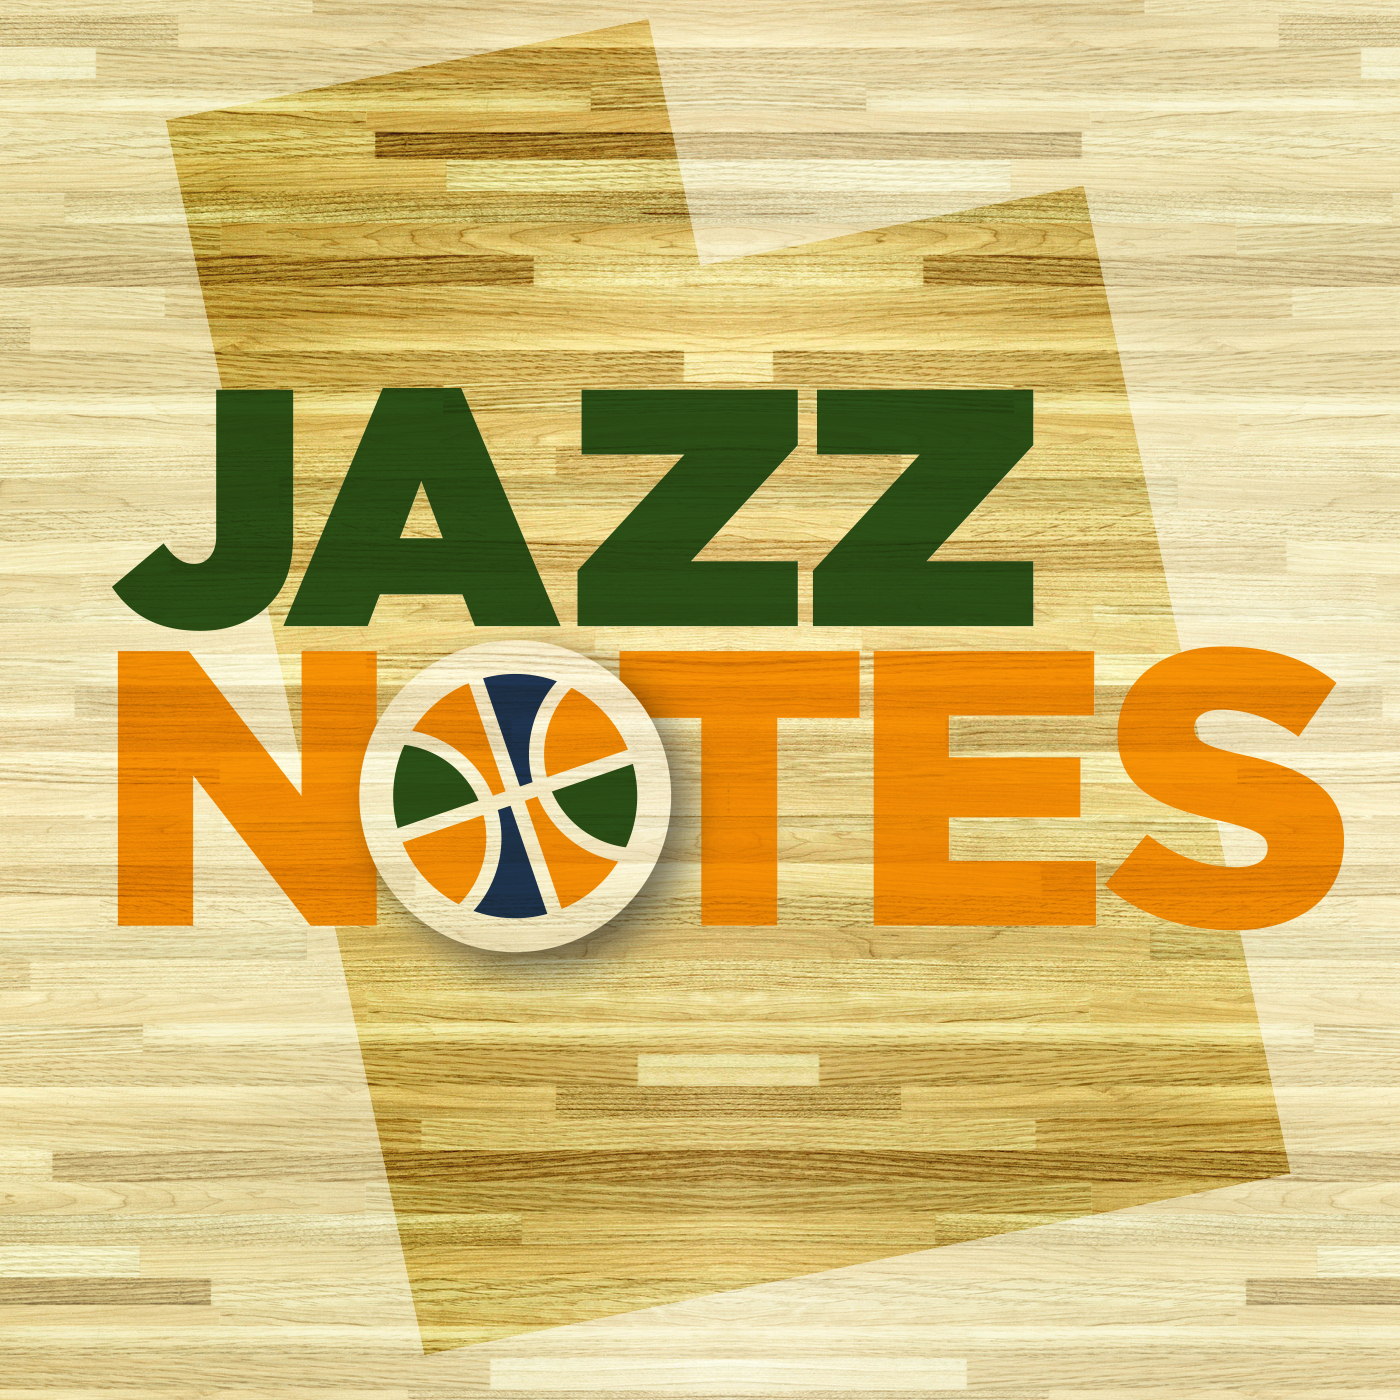 What's wrong with the Jazz?